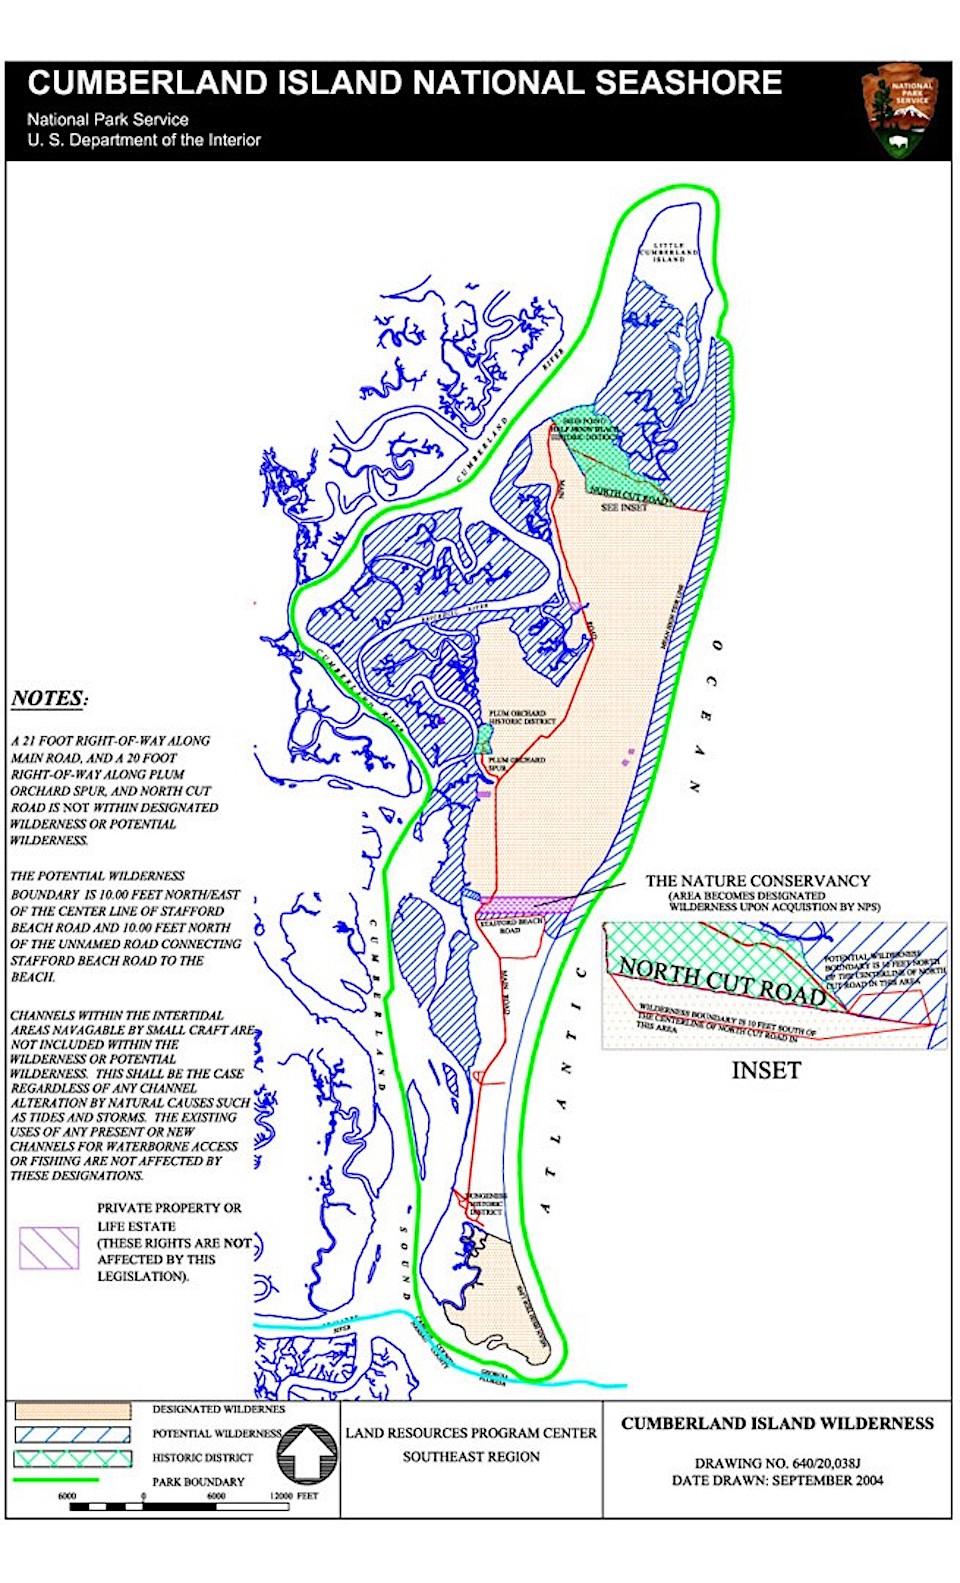 The northern half of Cumberland Island National Seashore is a mix of designated and potential wilderness/NPS graphic